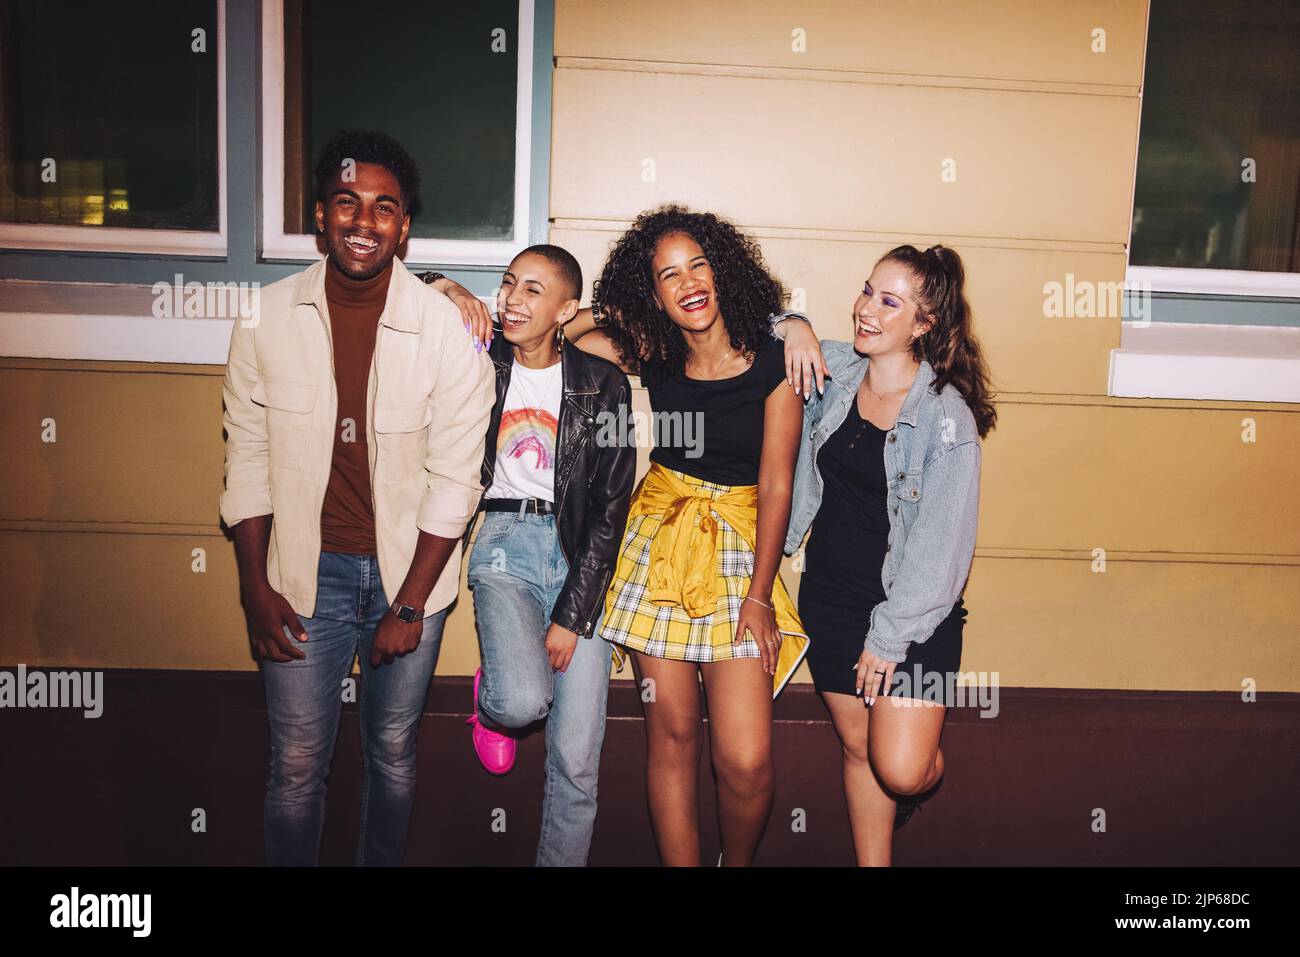 Cheerful friends leaning against a wall at night. Group of multicultural young people smiling happily while standing together outdoors. Carefree frien Stock Photo